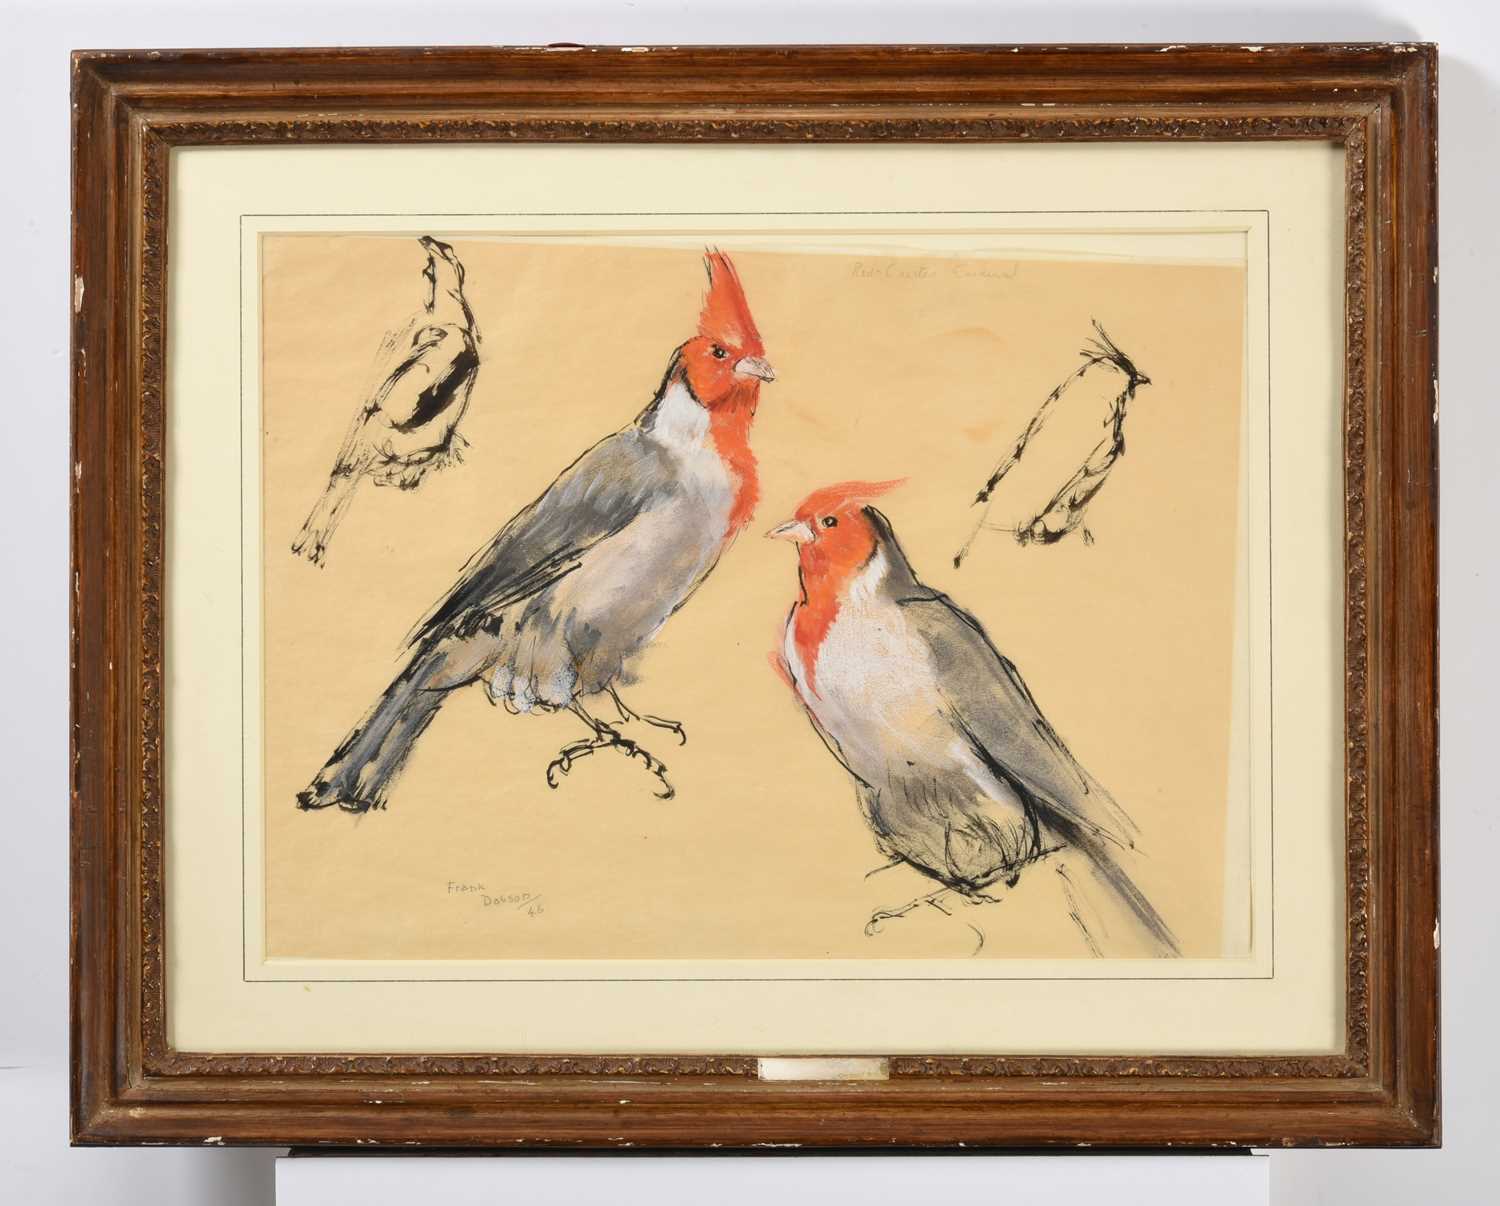 Frank Dobson RA (1886-1963) "Red Crested Cardinals" Signed, inscribed and dated (19)46, mixed media, - Image 2 of 3